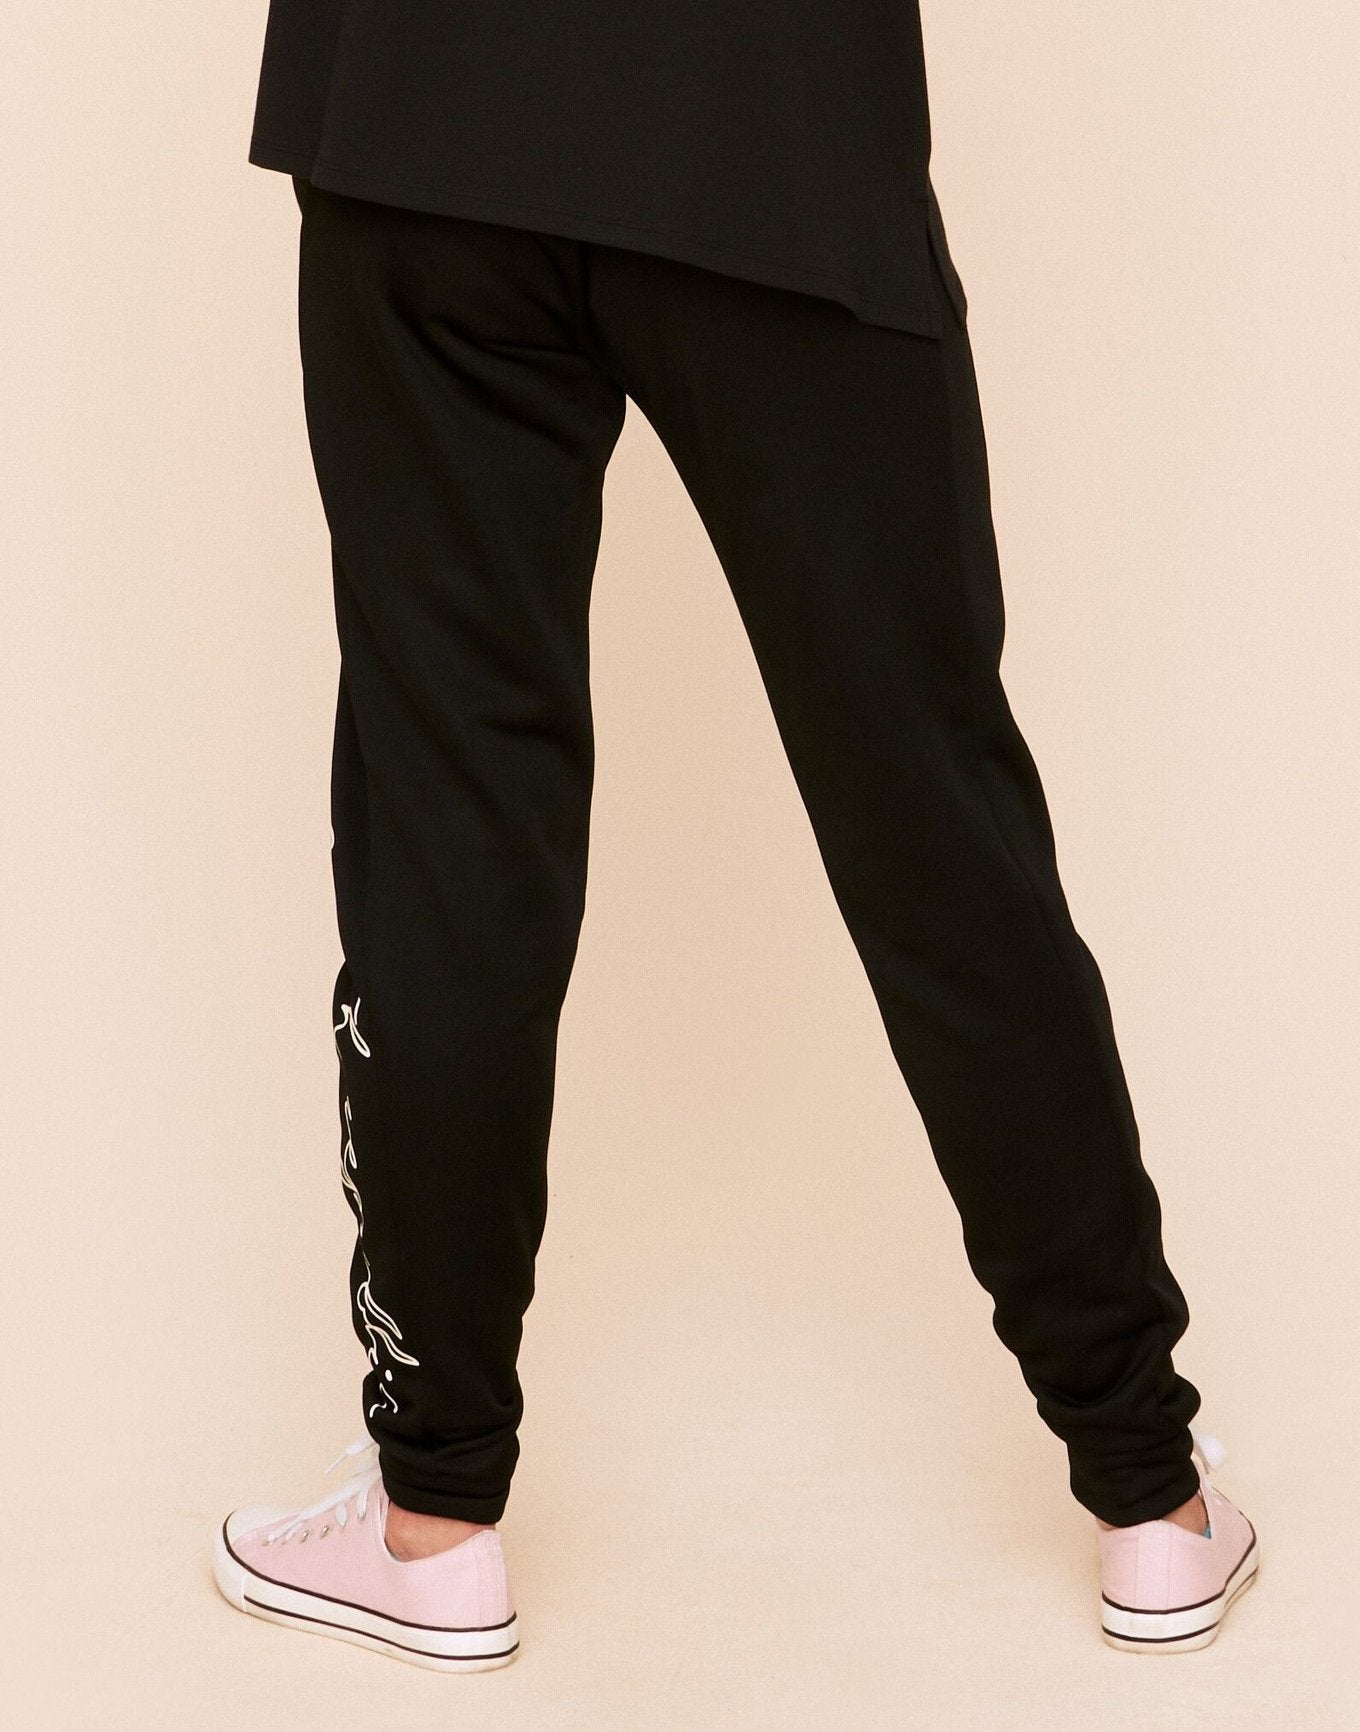 Earth Republic Shawn Jogger Pant Joggers in color Jet Black and shape jogger